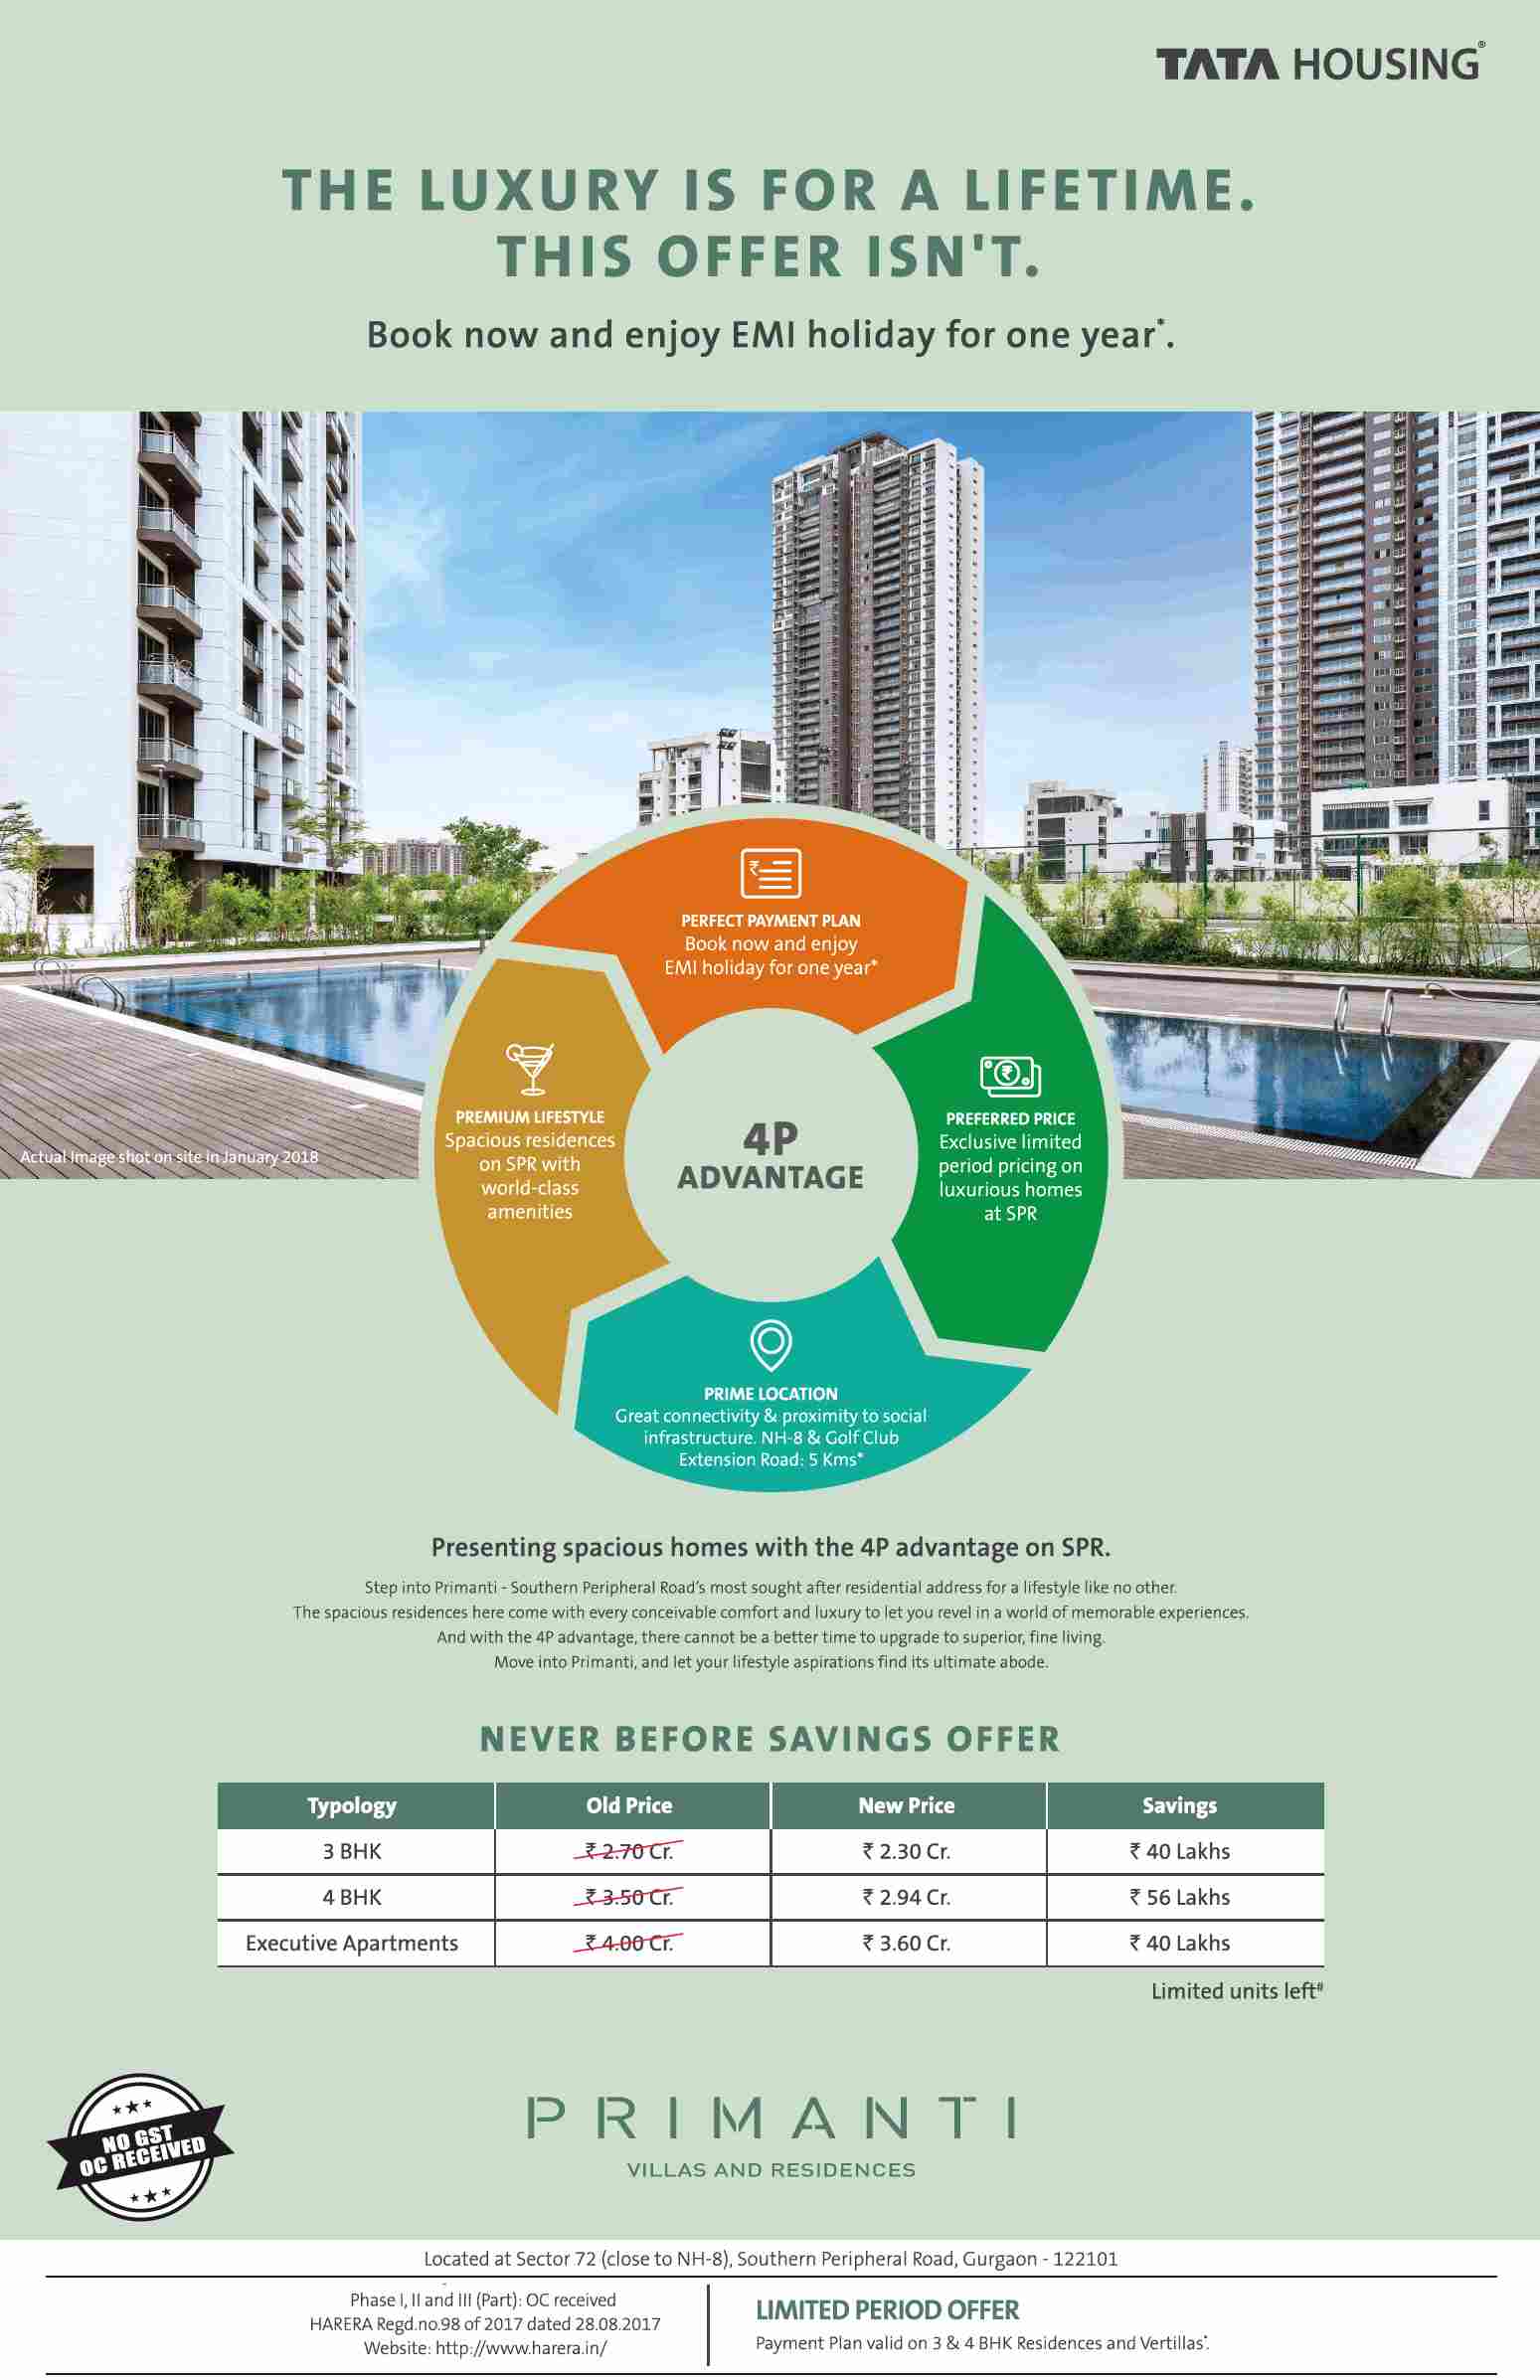 Presenting spacious homes with the 4 P advantage at Tata Primanti in Gurgaon Update